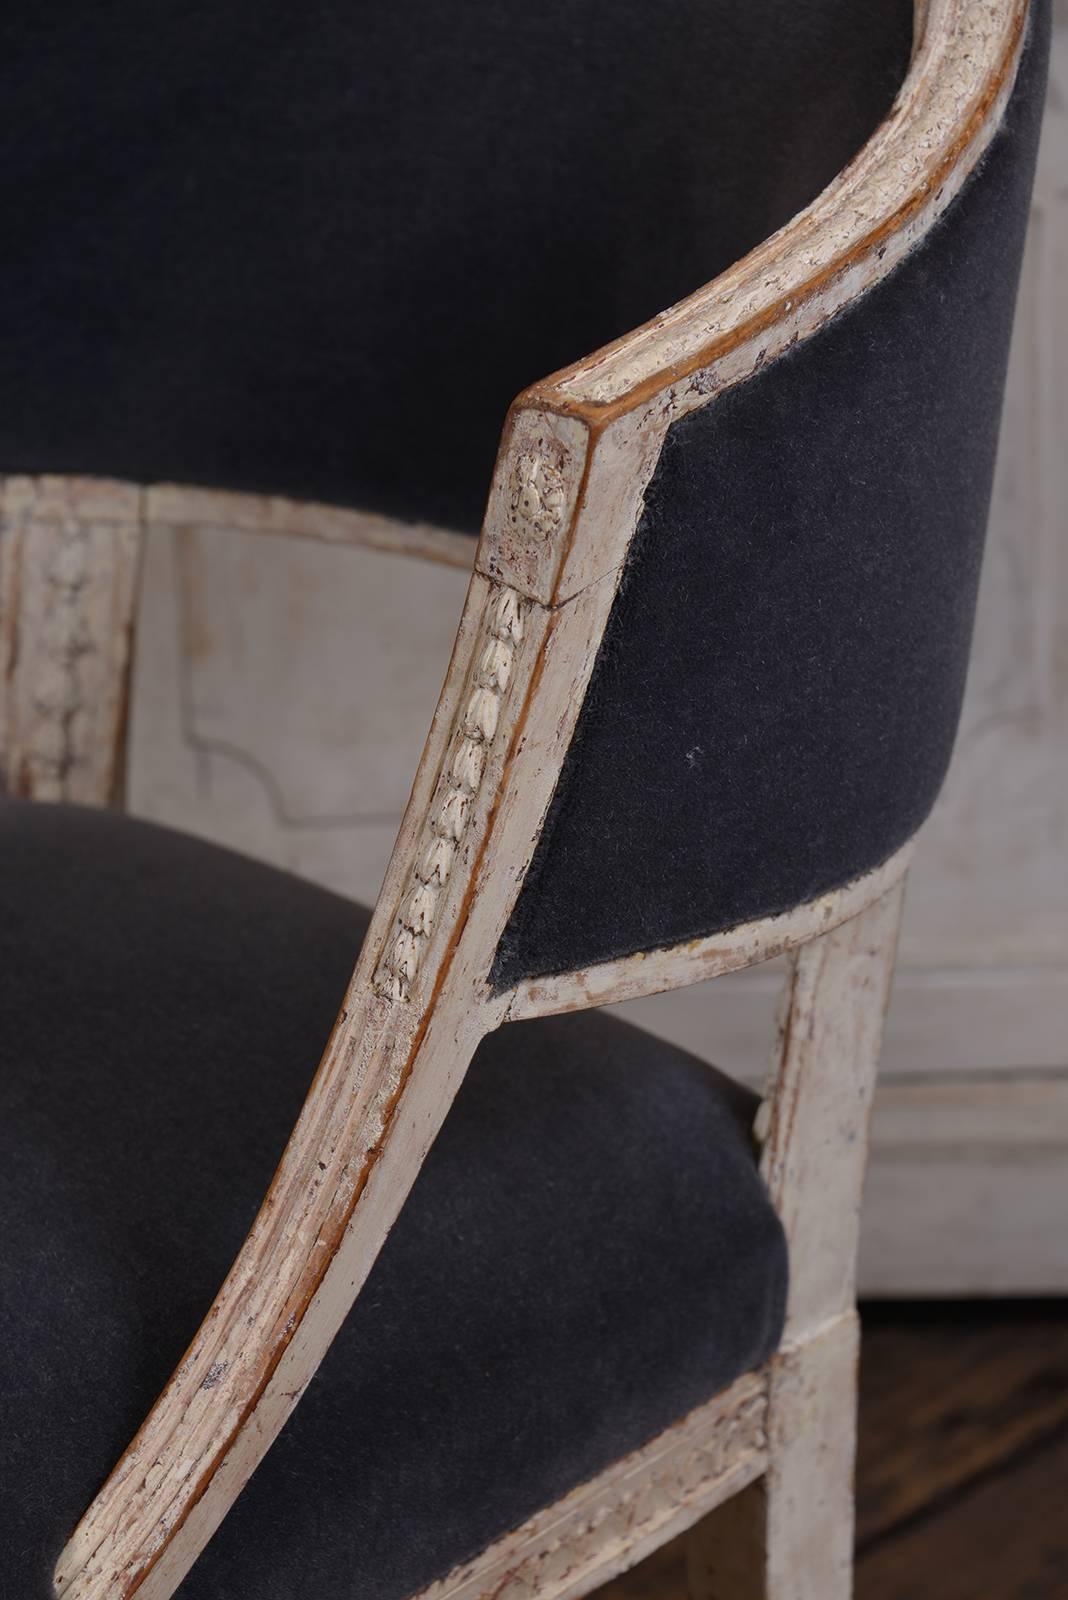 Very sophisticated single Swedish Barrel back chair from the Gustavian period, upholstered in Maharam mohair.
